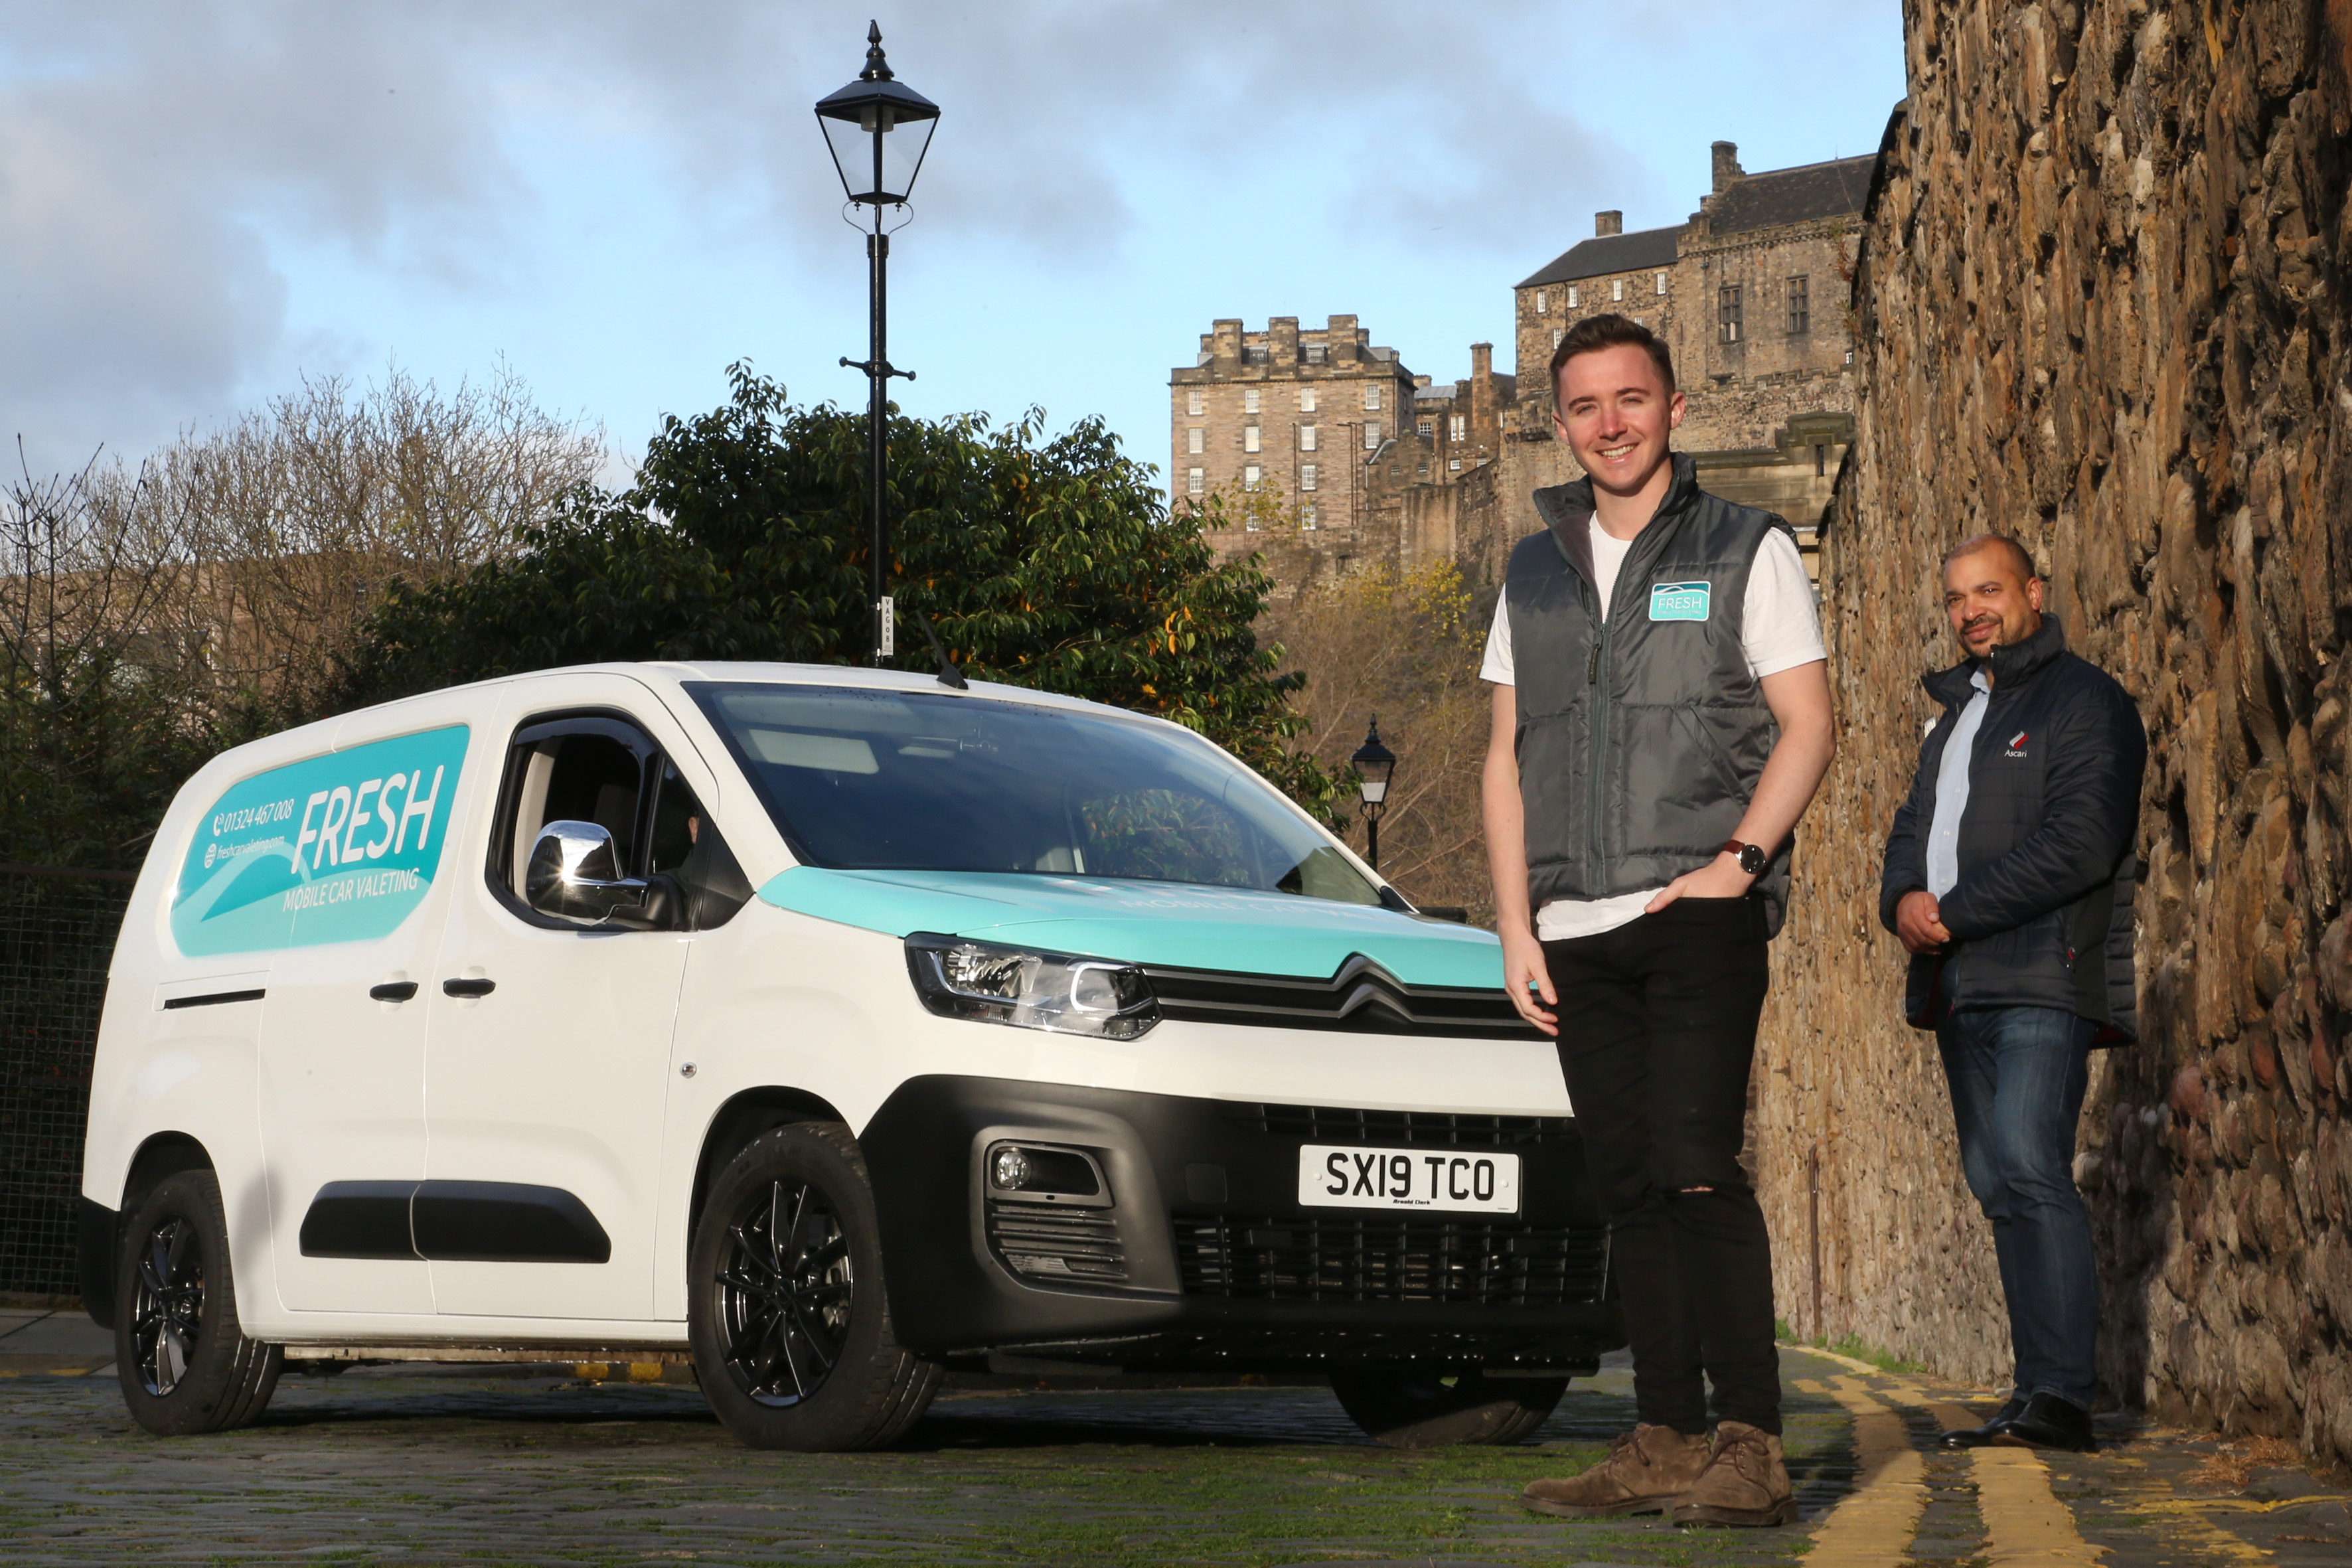 Fresh Mobile Car Valeting launches £1m investment round